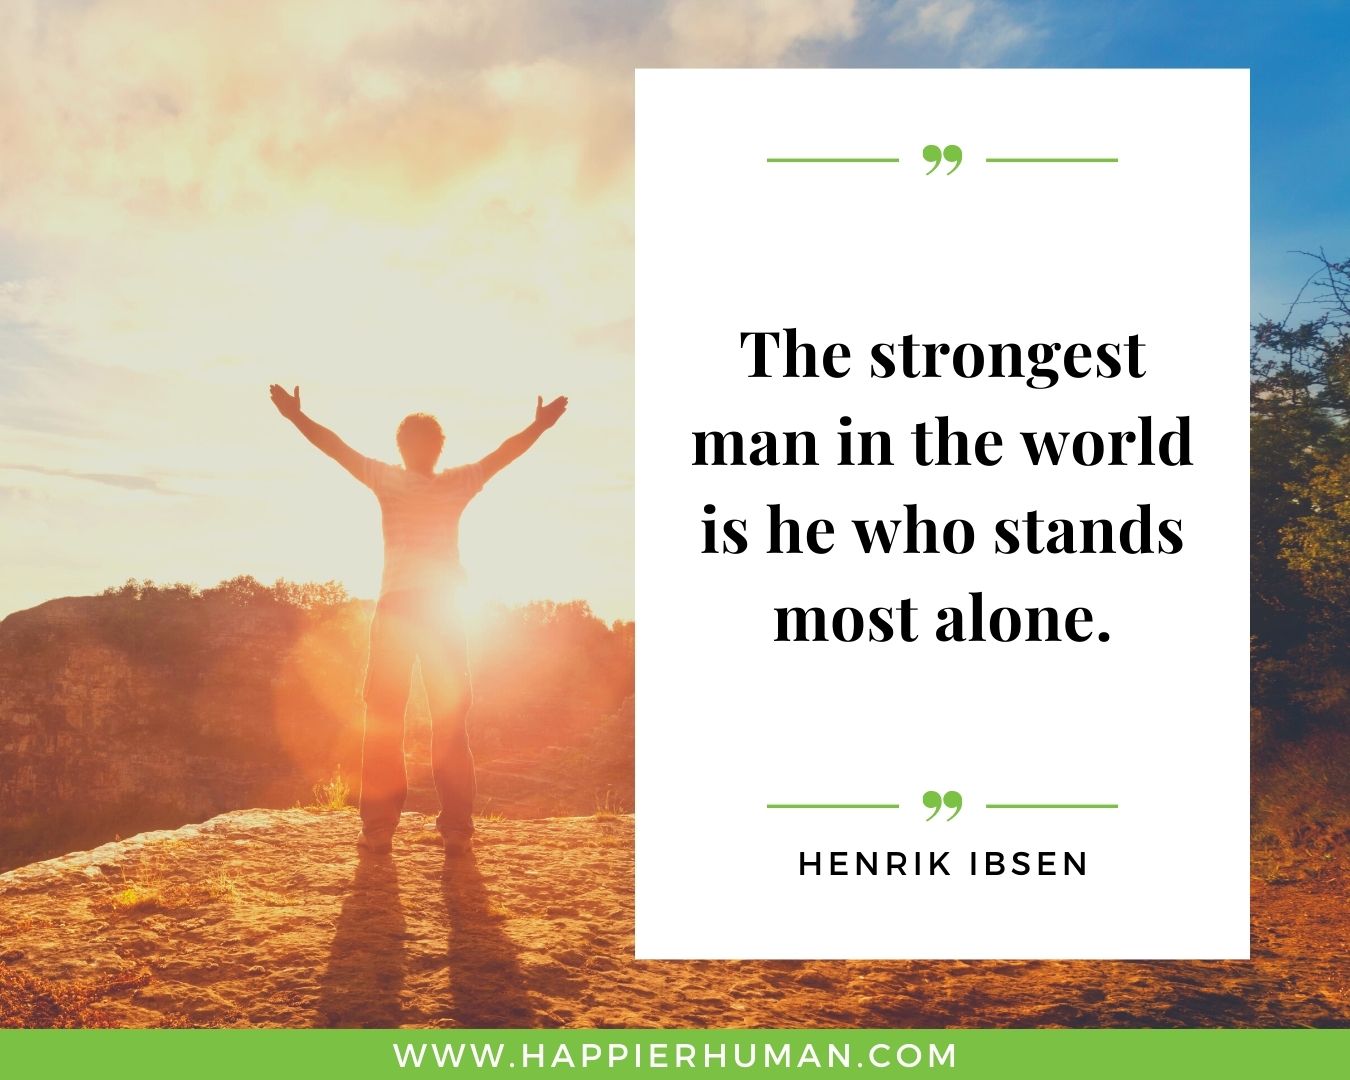 Loneliness Quotes - “The strongest man in the world is he who stands most alone.”– Henrik Ibsen